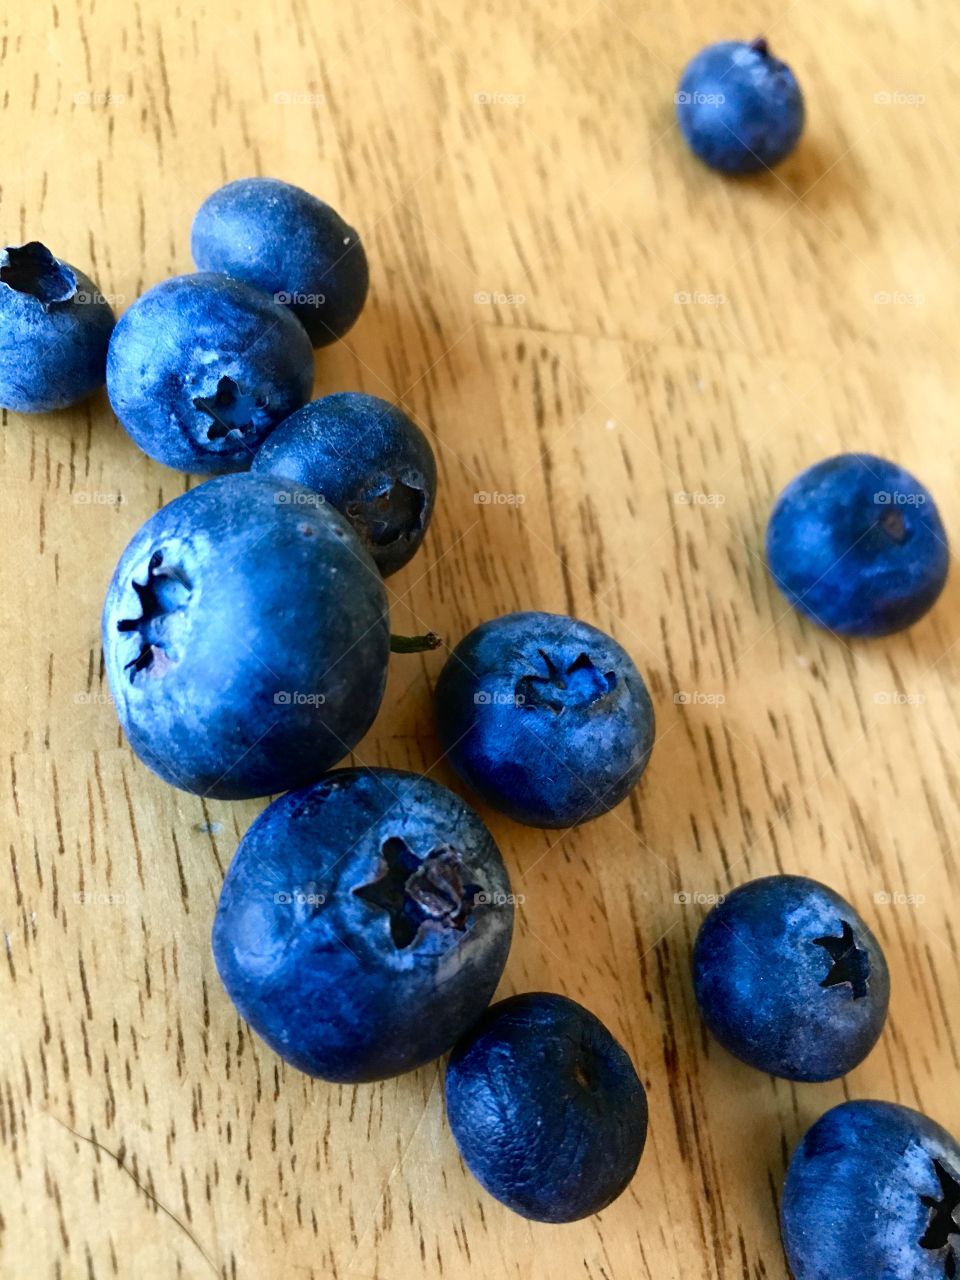 Just blueberries 